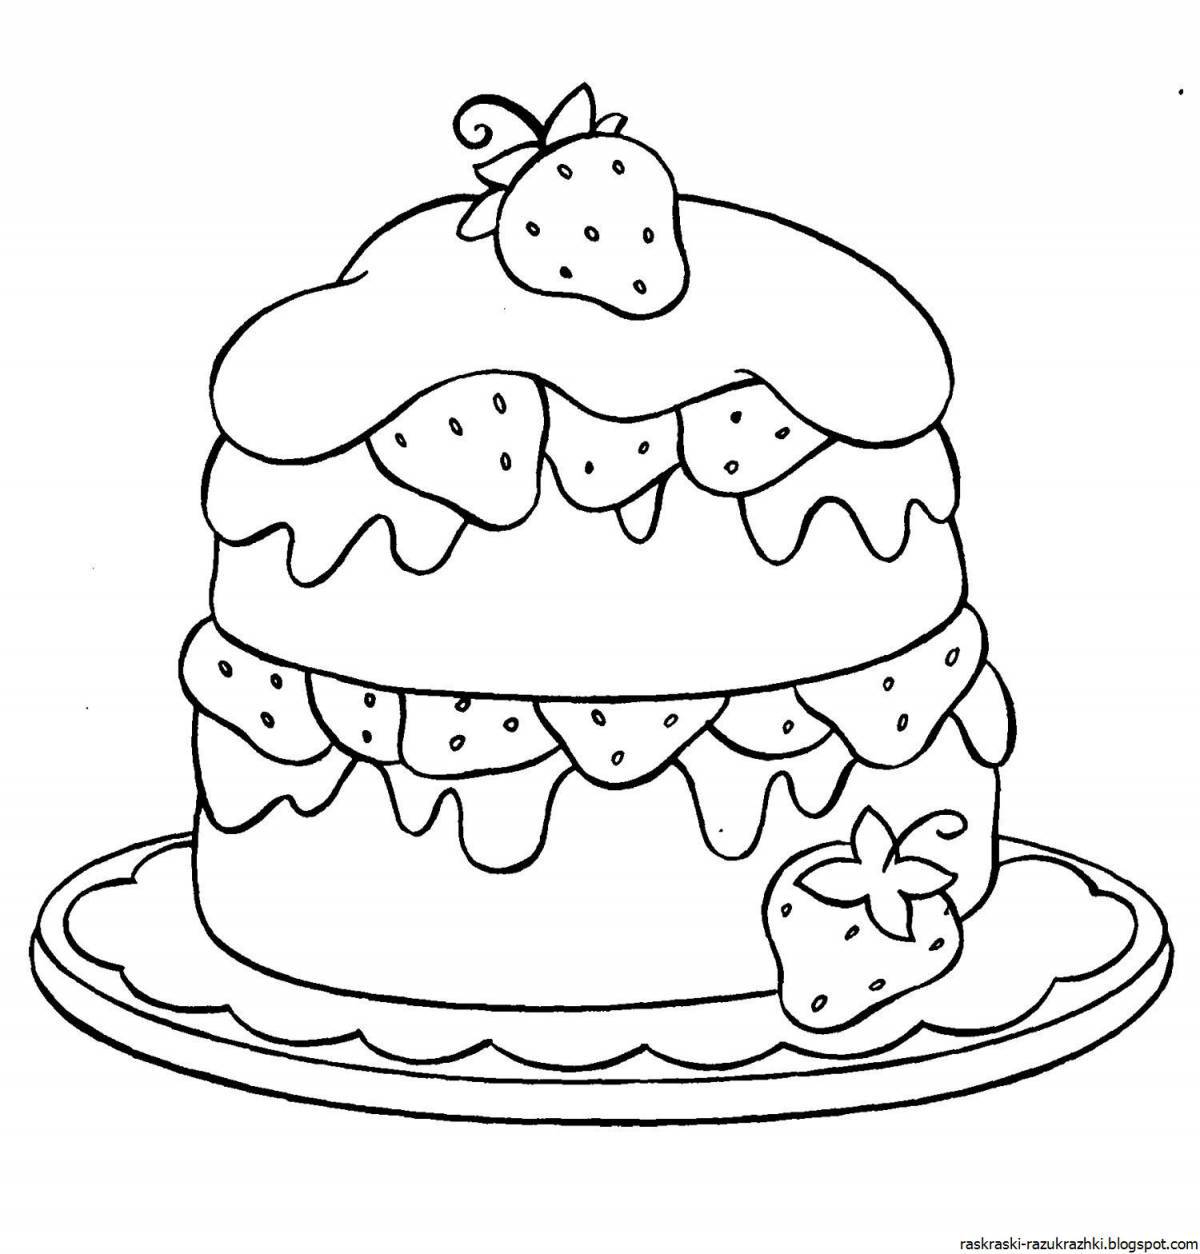 Adorable cake coloring pages for kids